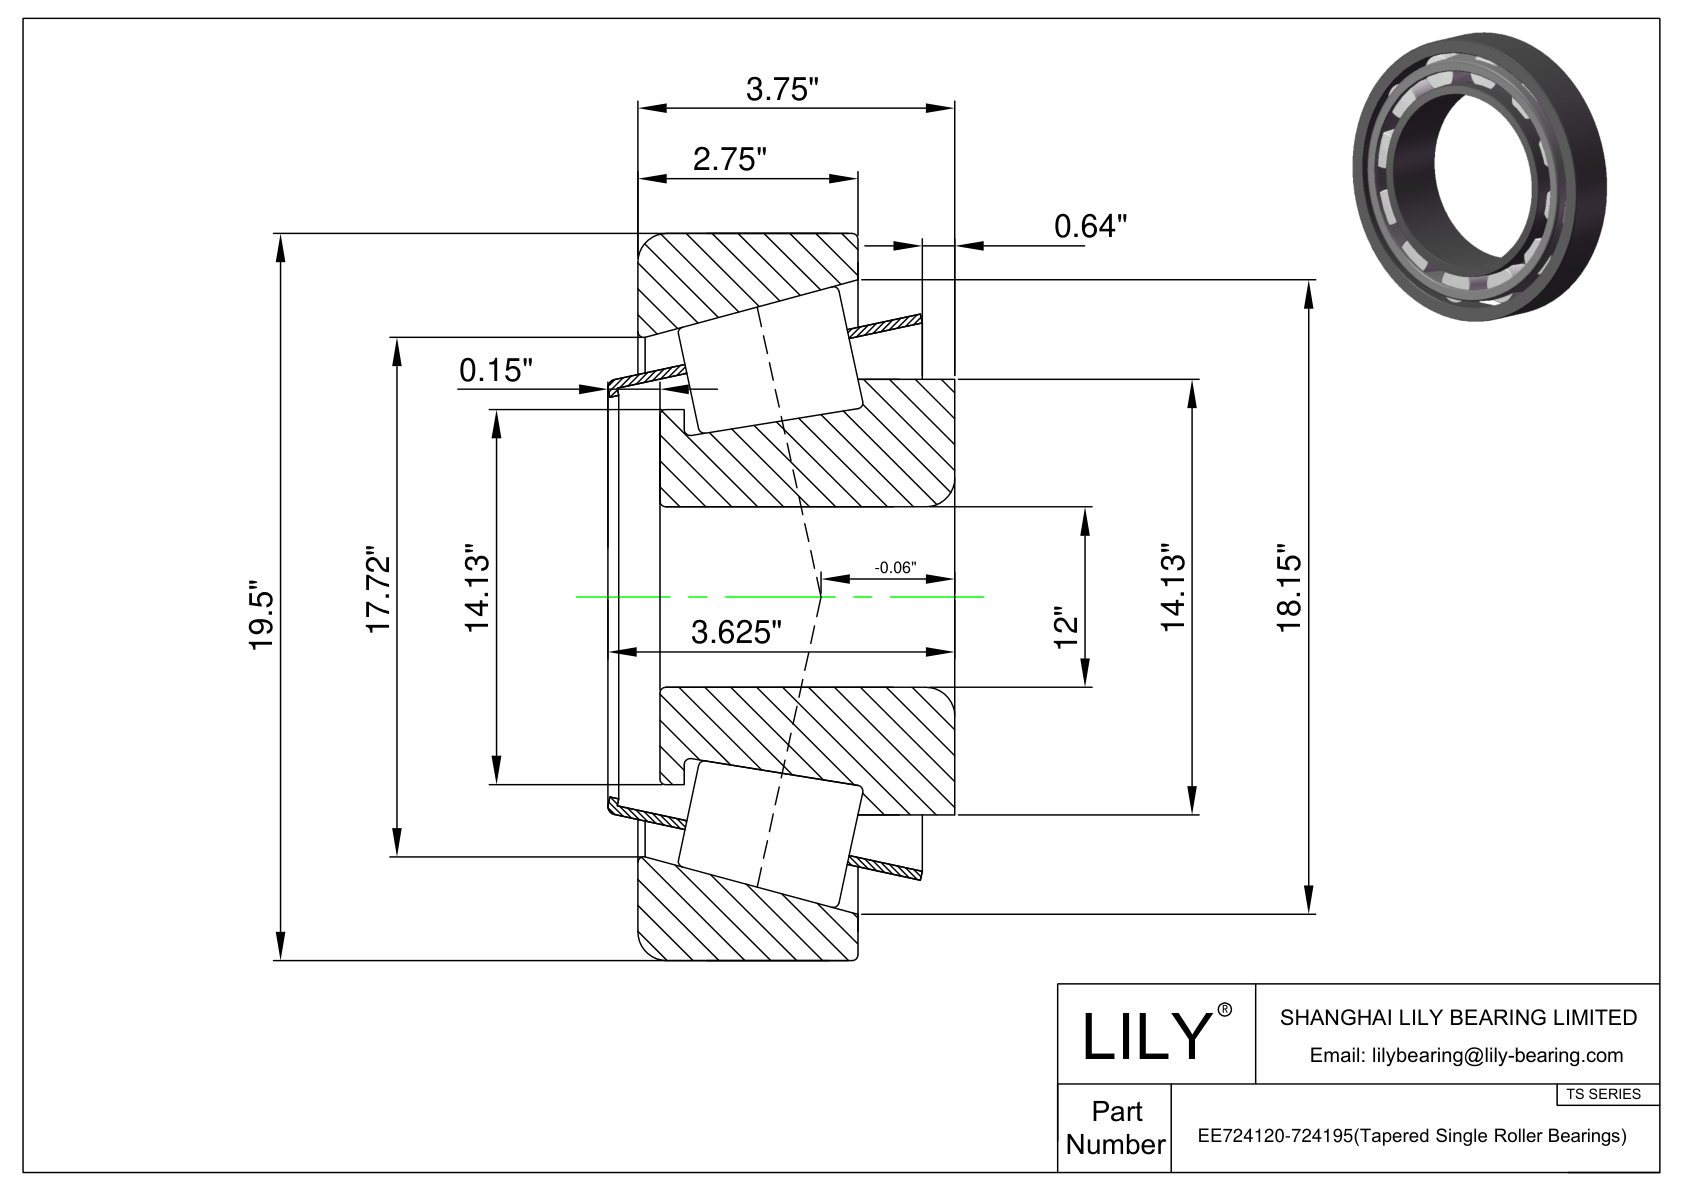 EE724120-724195 TS (Tapered Single Roller Bearings) (Imperial) cad drawing